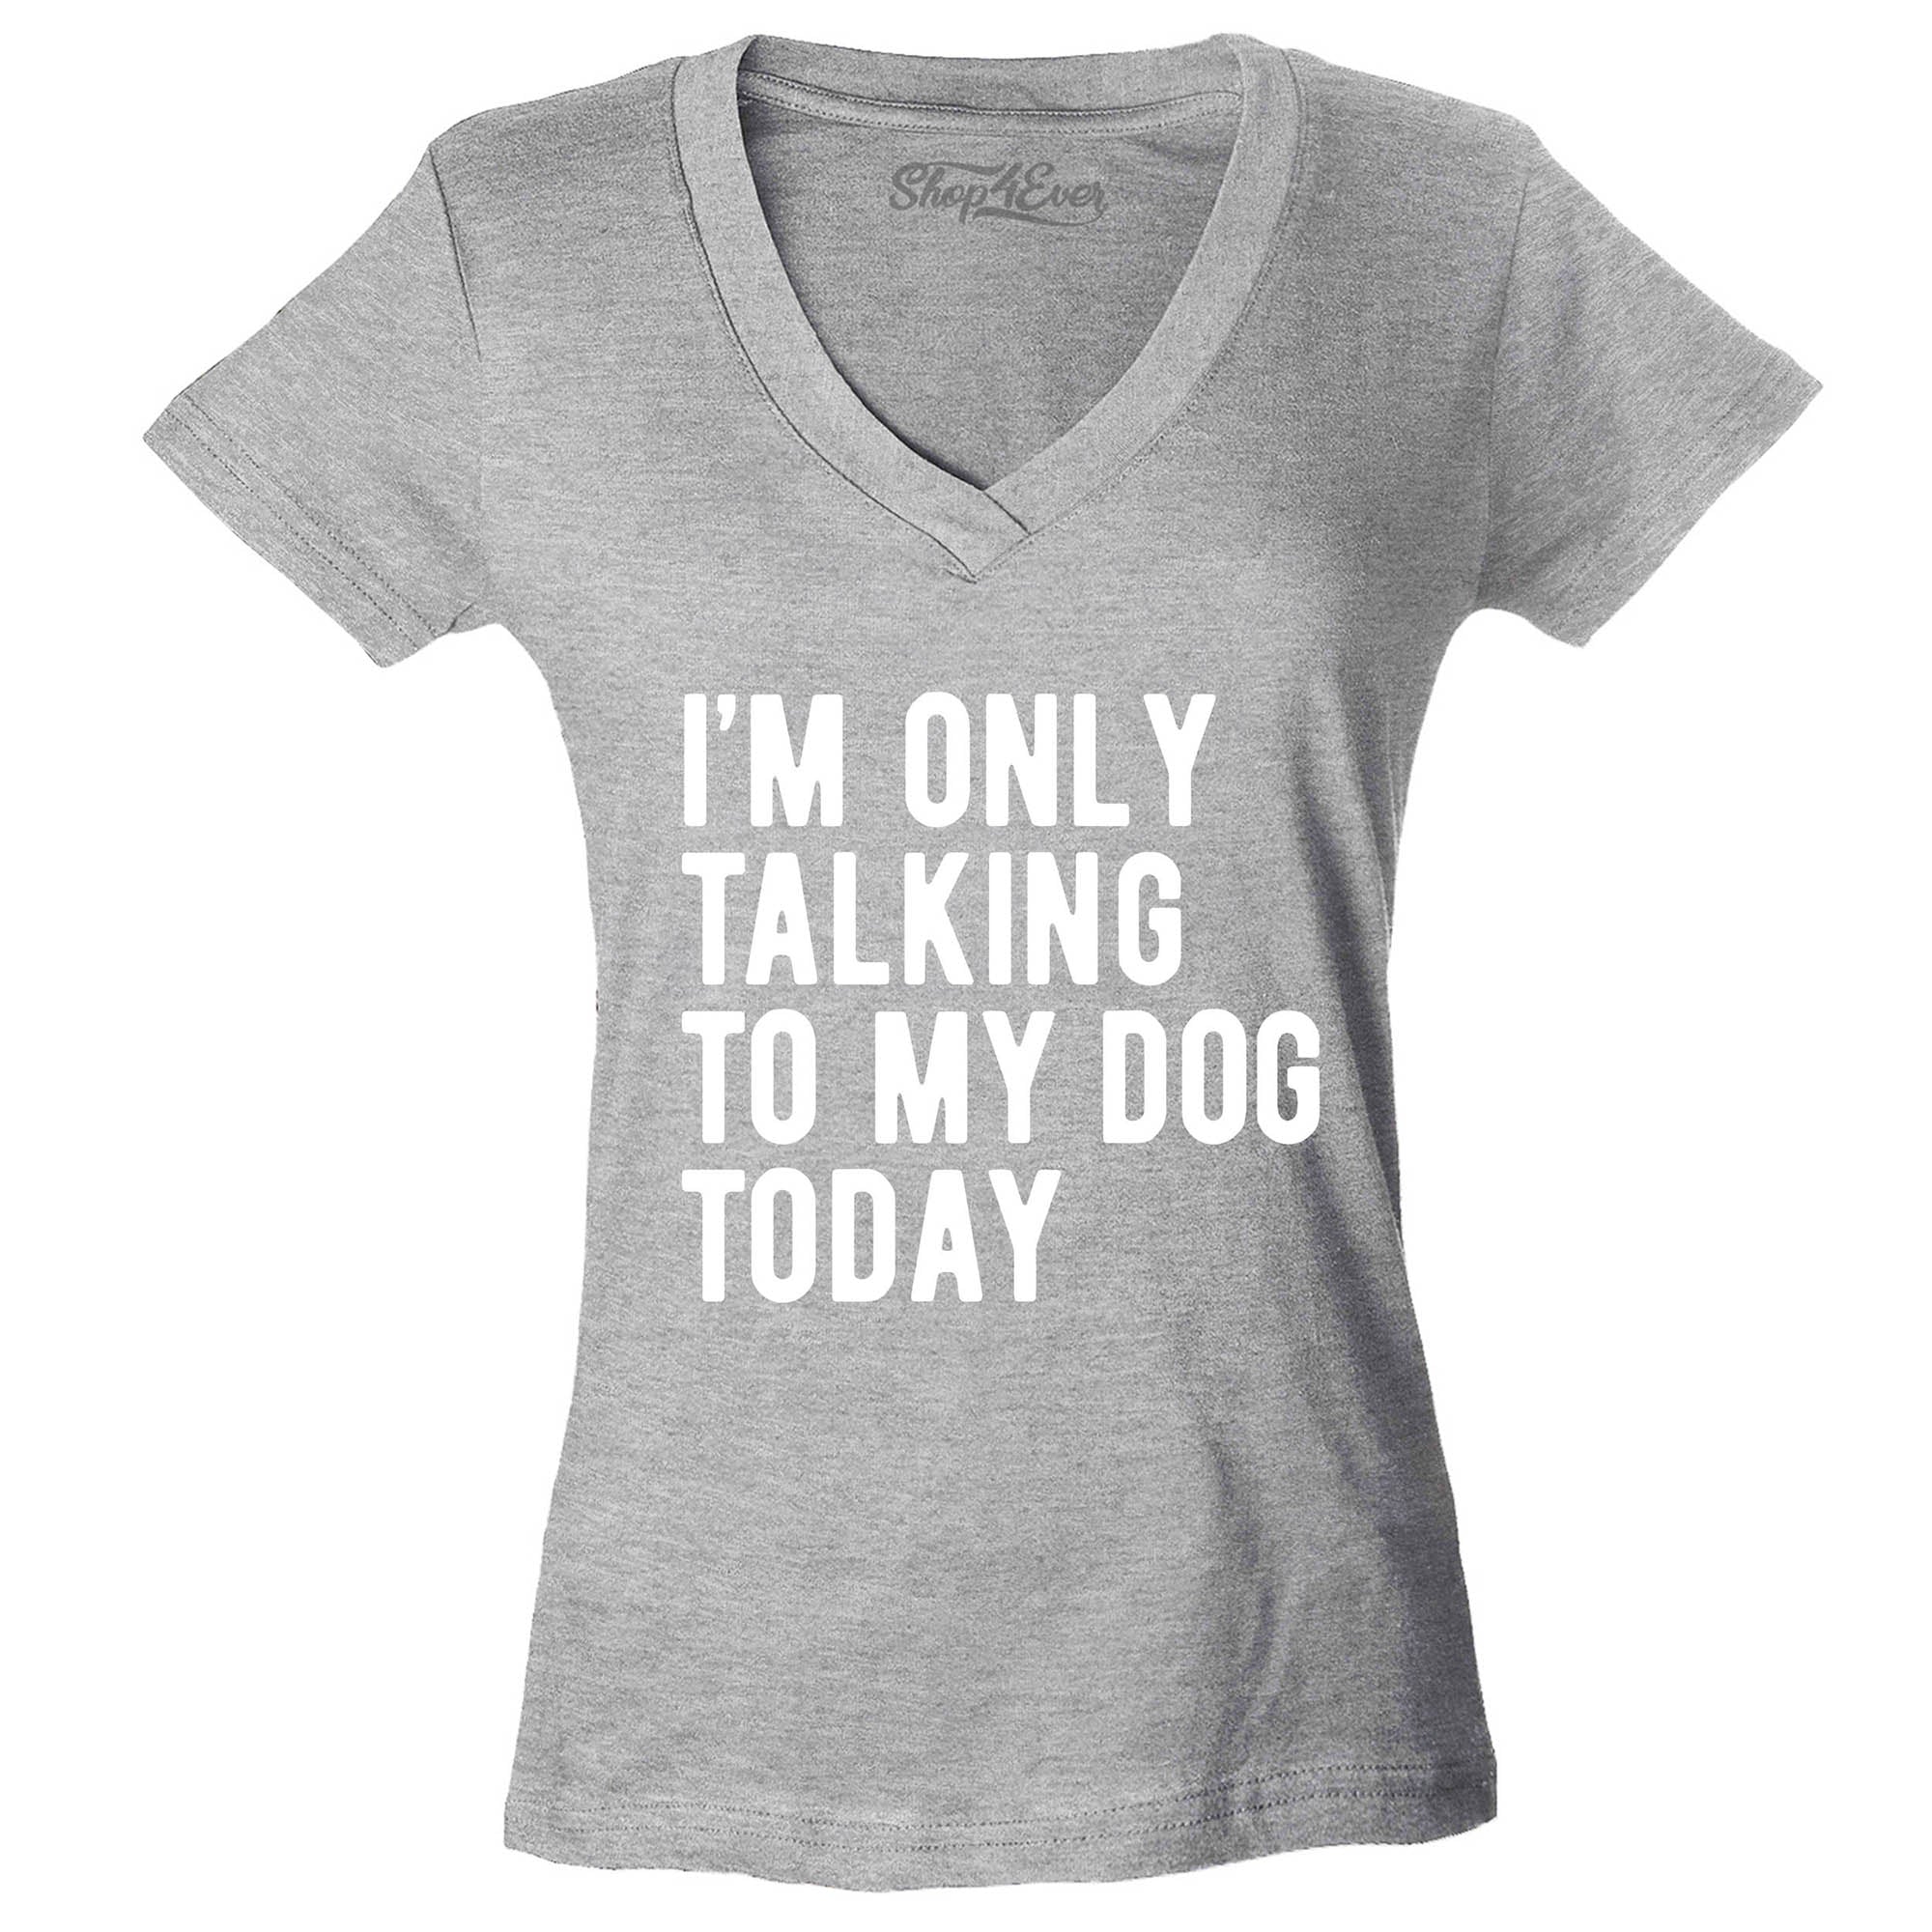 I'm Only Talking to My Dog Today Women's V-Neck T-Shirt Slim Fit